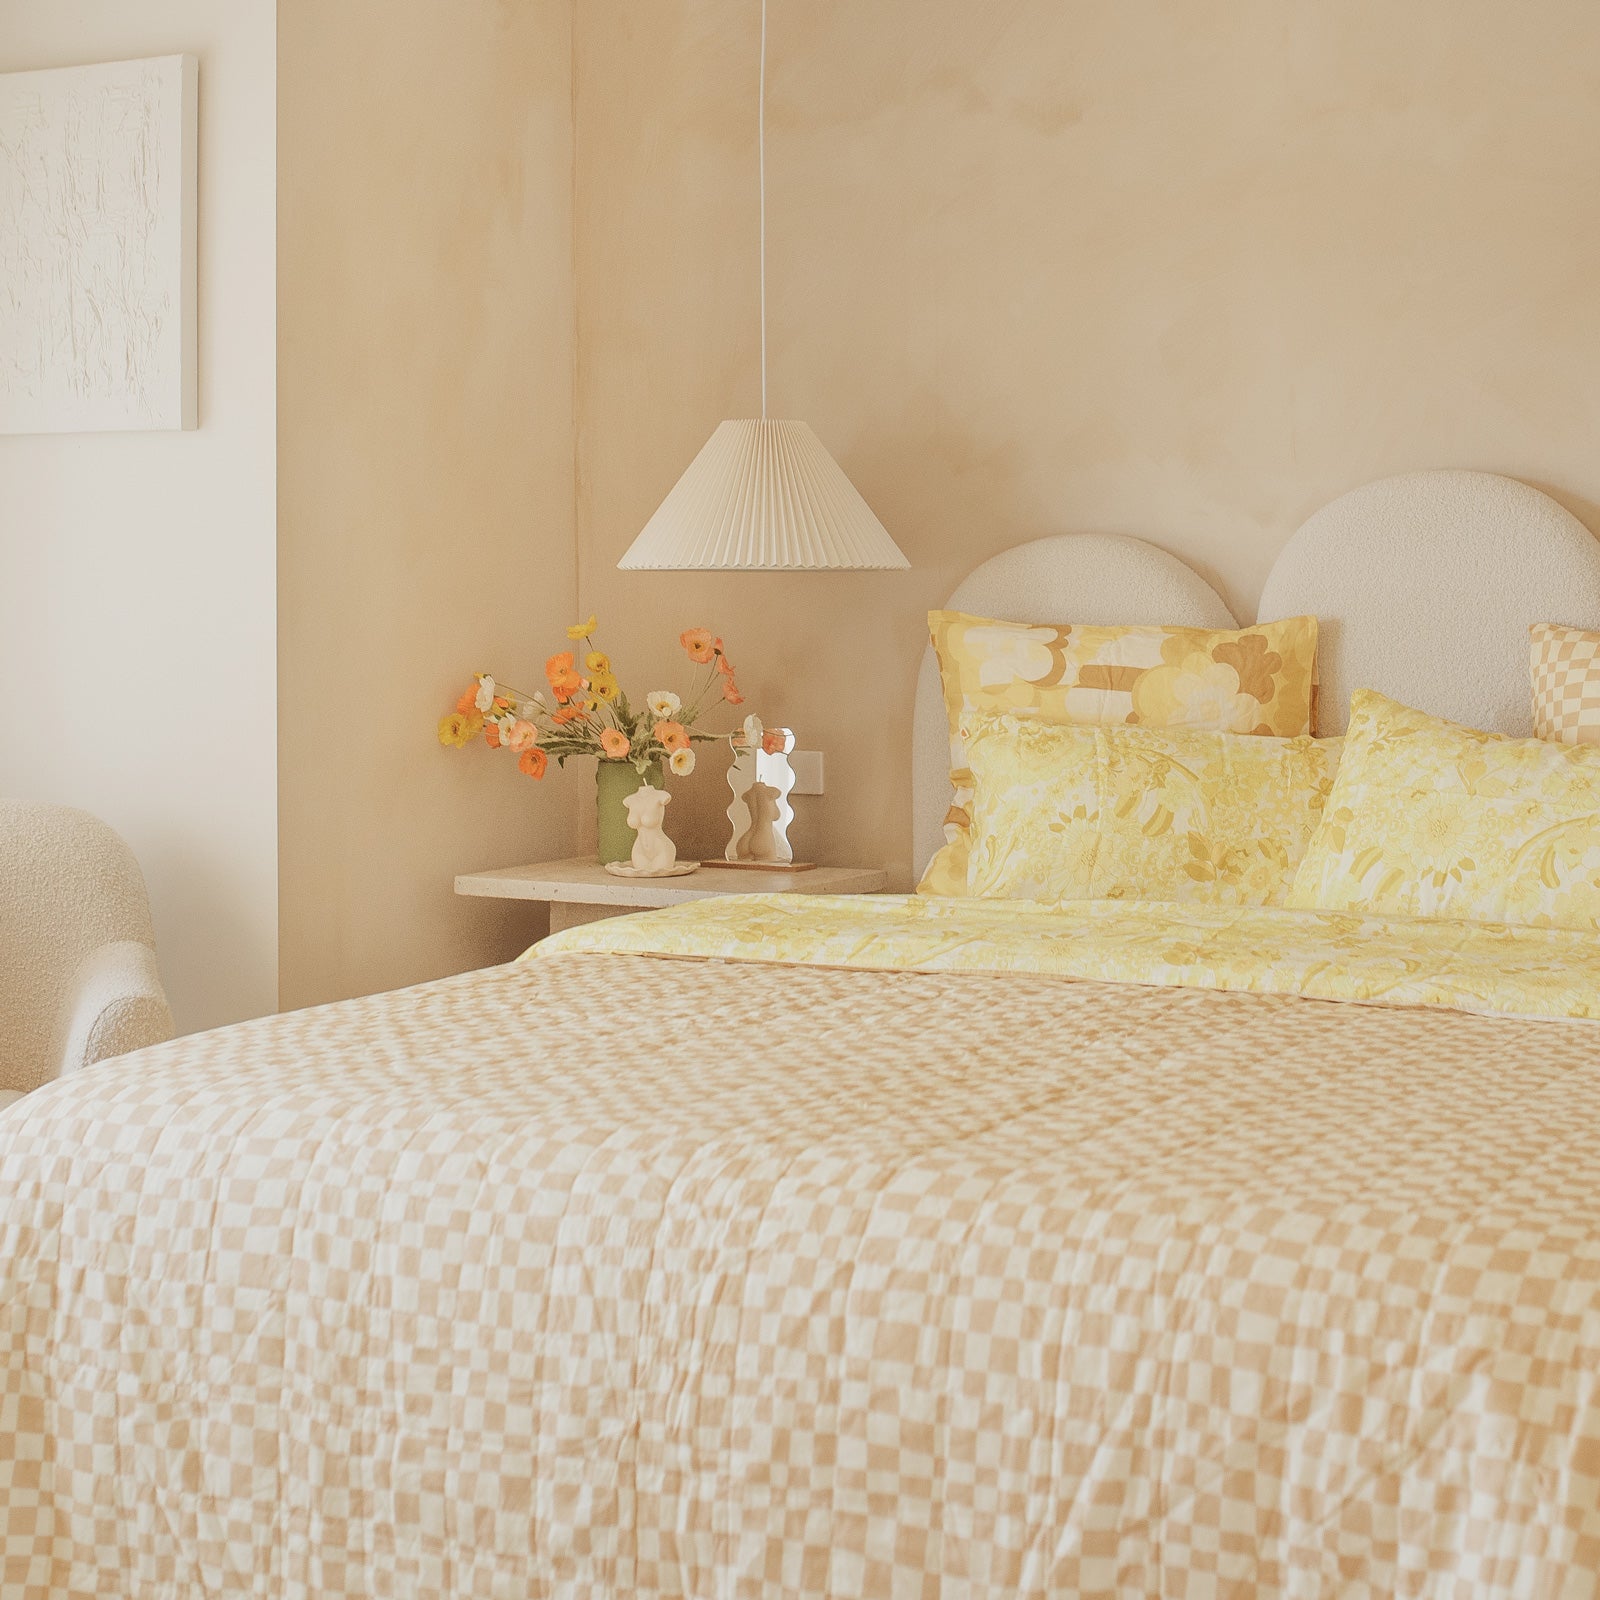 The Colour Trend That Inspired Our Latest Bedding Collection: Buttercream